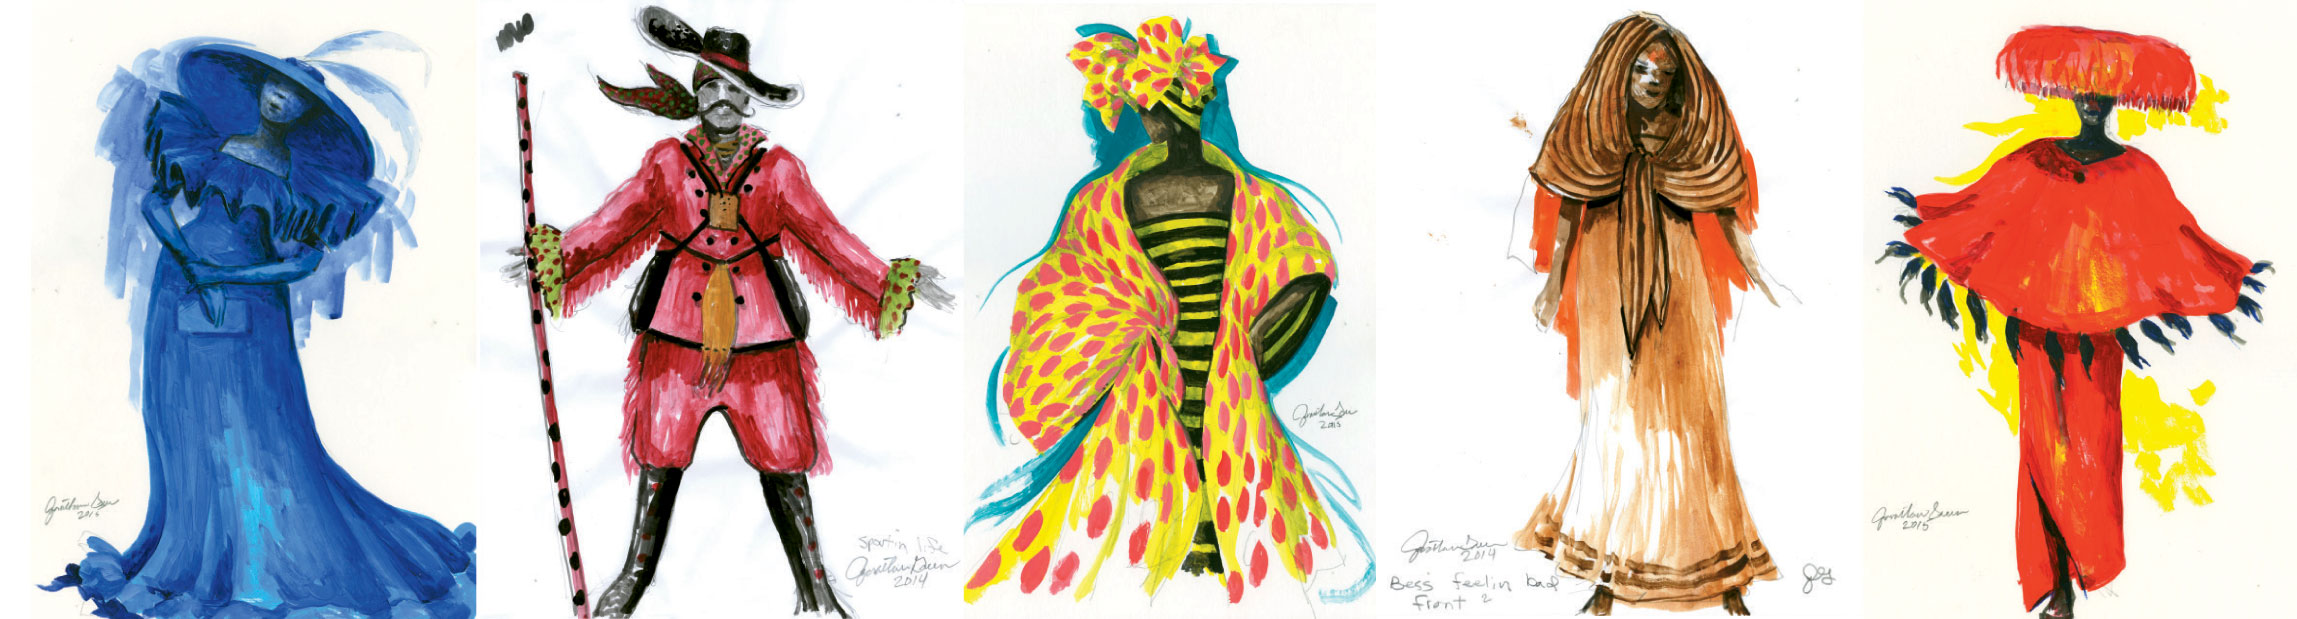 Costume designer Annie Simone will take her cues from Green’s interpretive sketches and his more specific costume sketches for ensemble members and lead characters, such as Sportin’ Life and Bess.